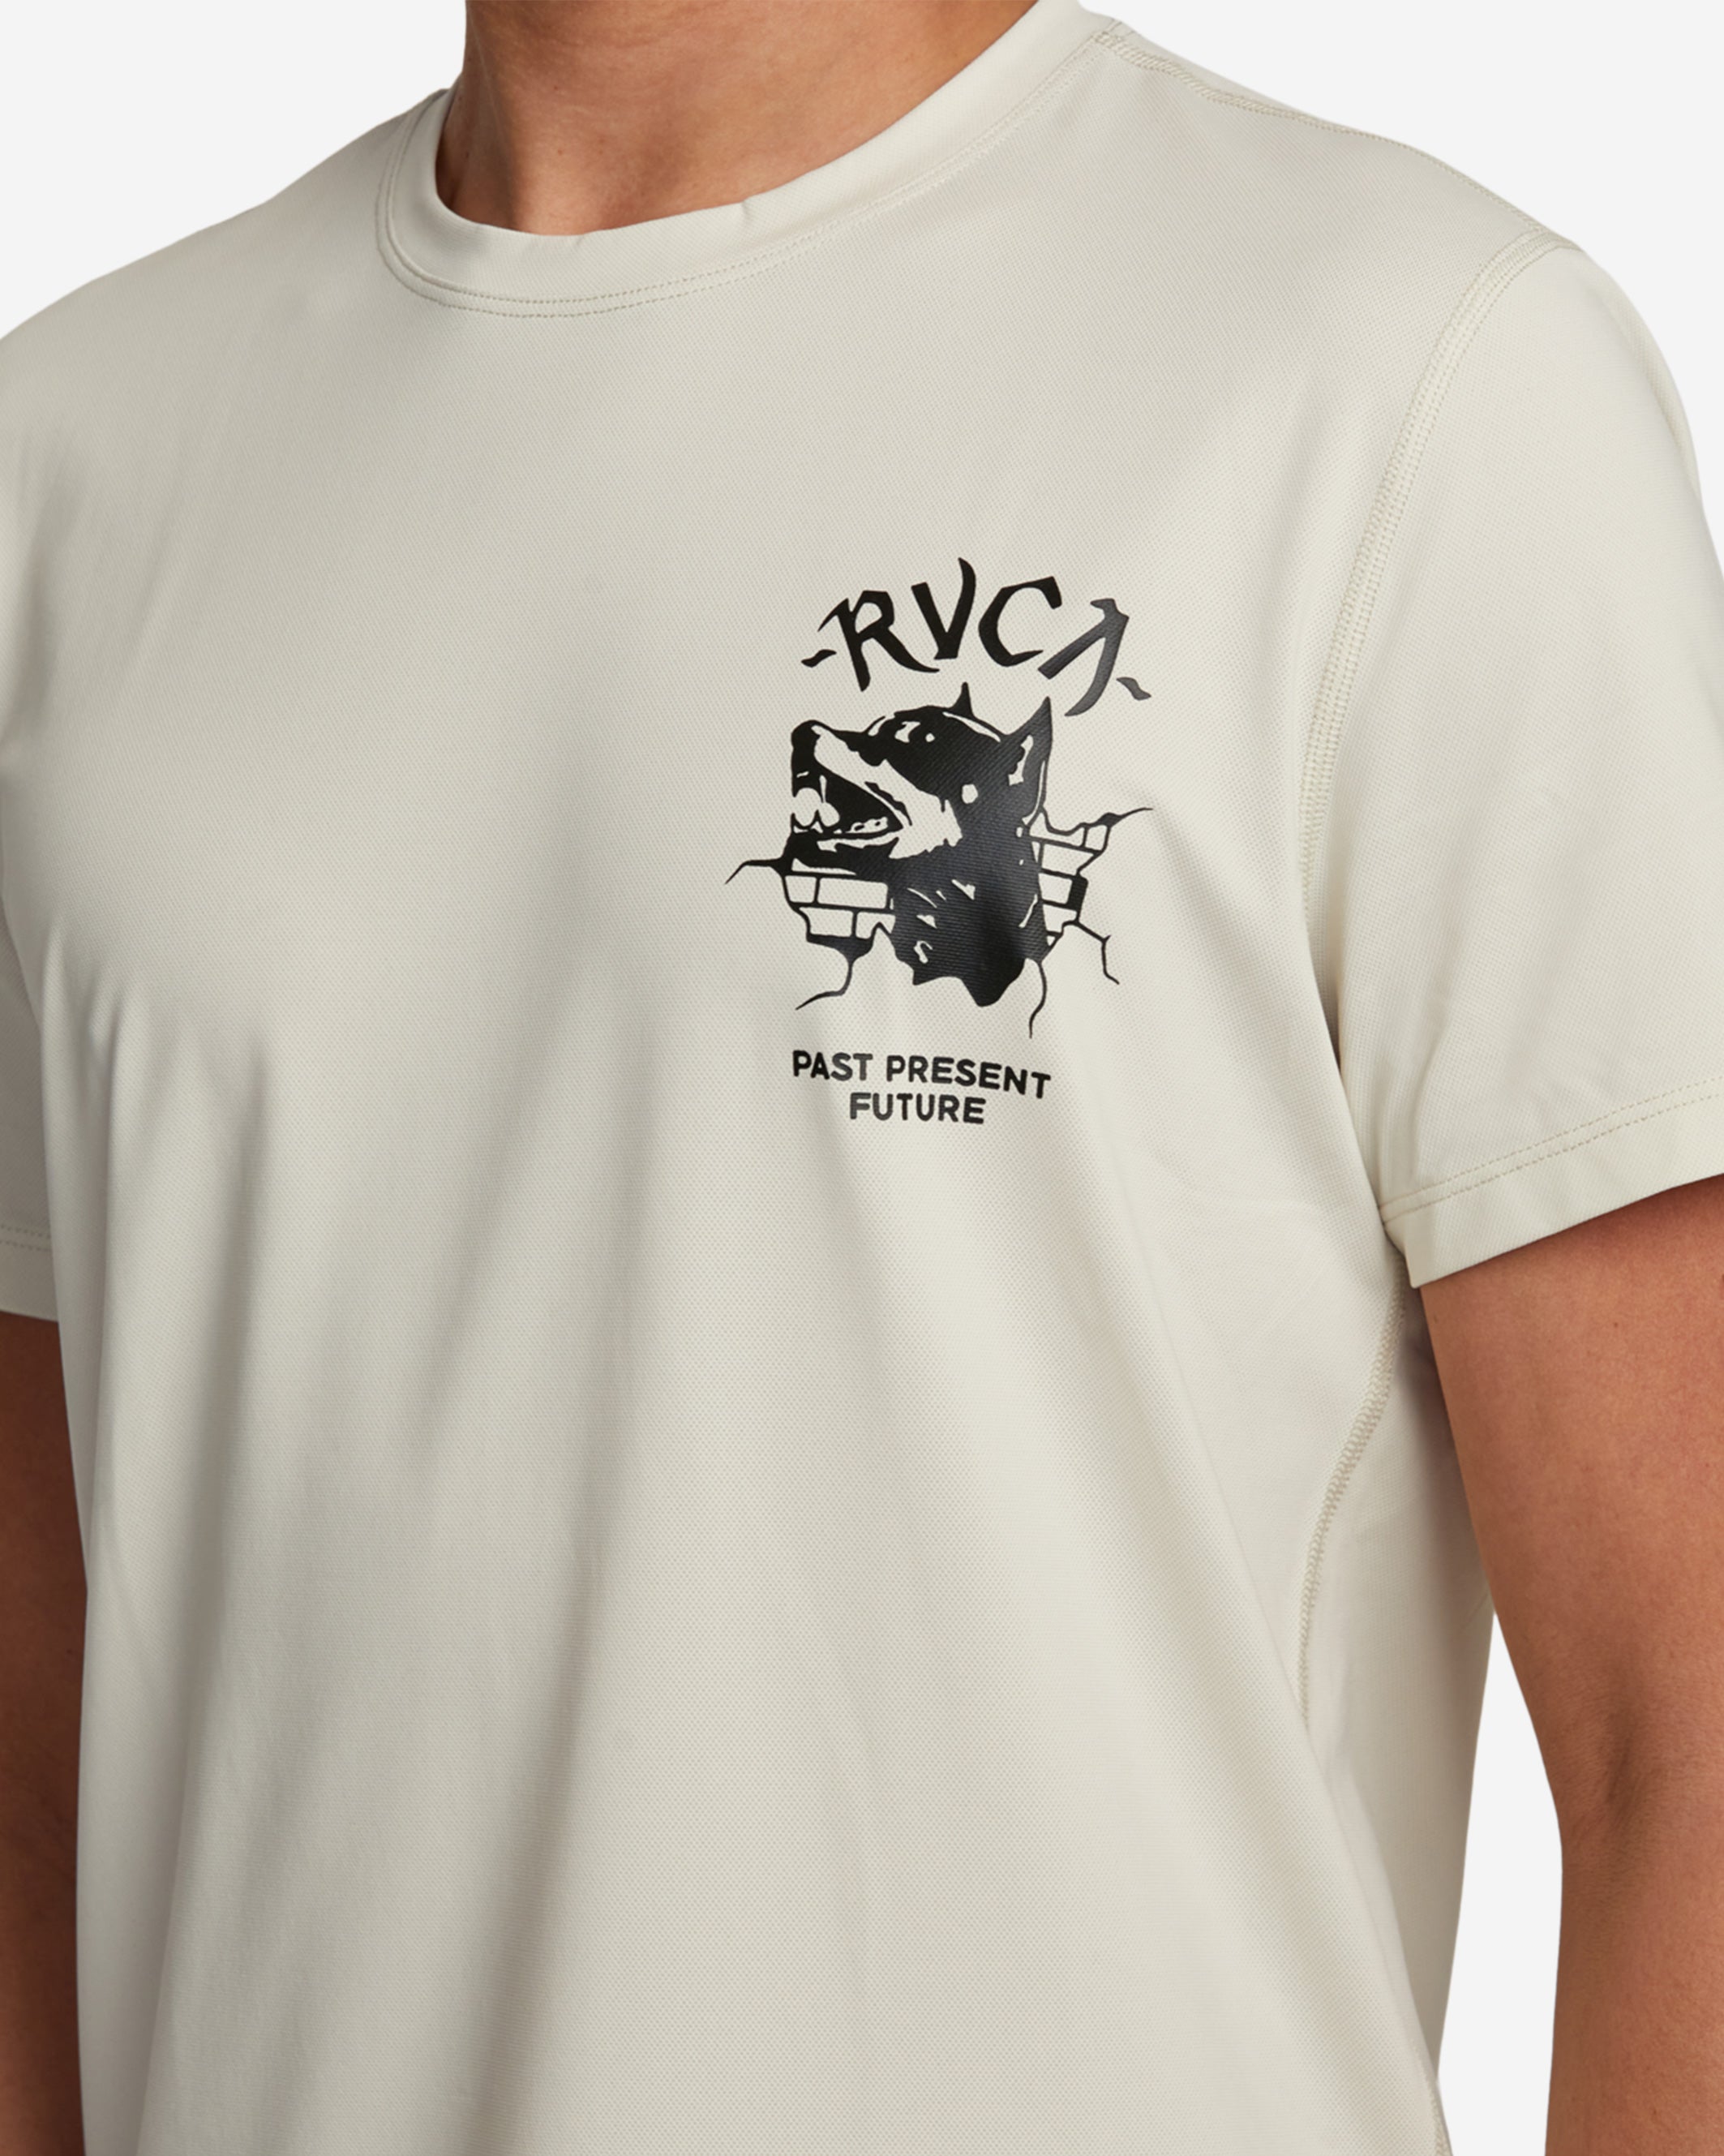 Made of cotton fabric with a lightweight feel, this graphic tee offers a regular fit with screen-printed artwork on the chest and back. Complete with the RVCA red stitch.